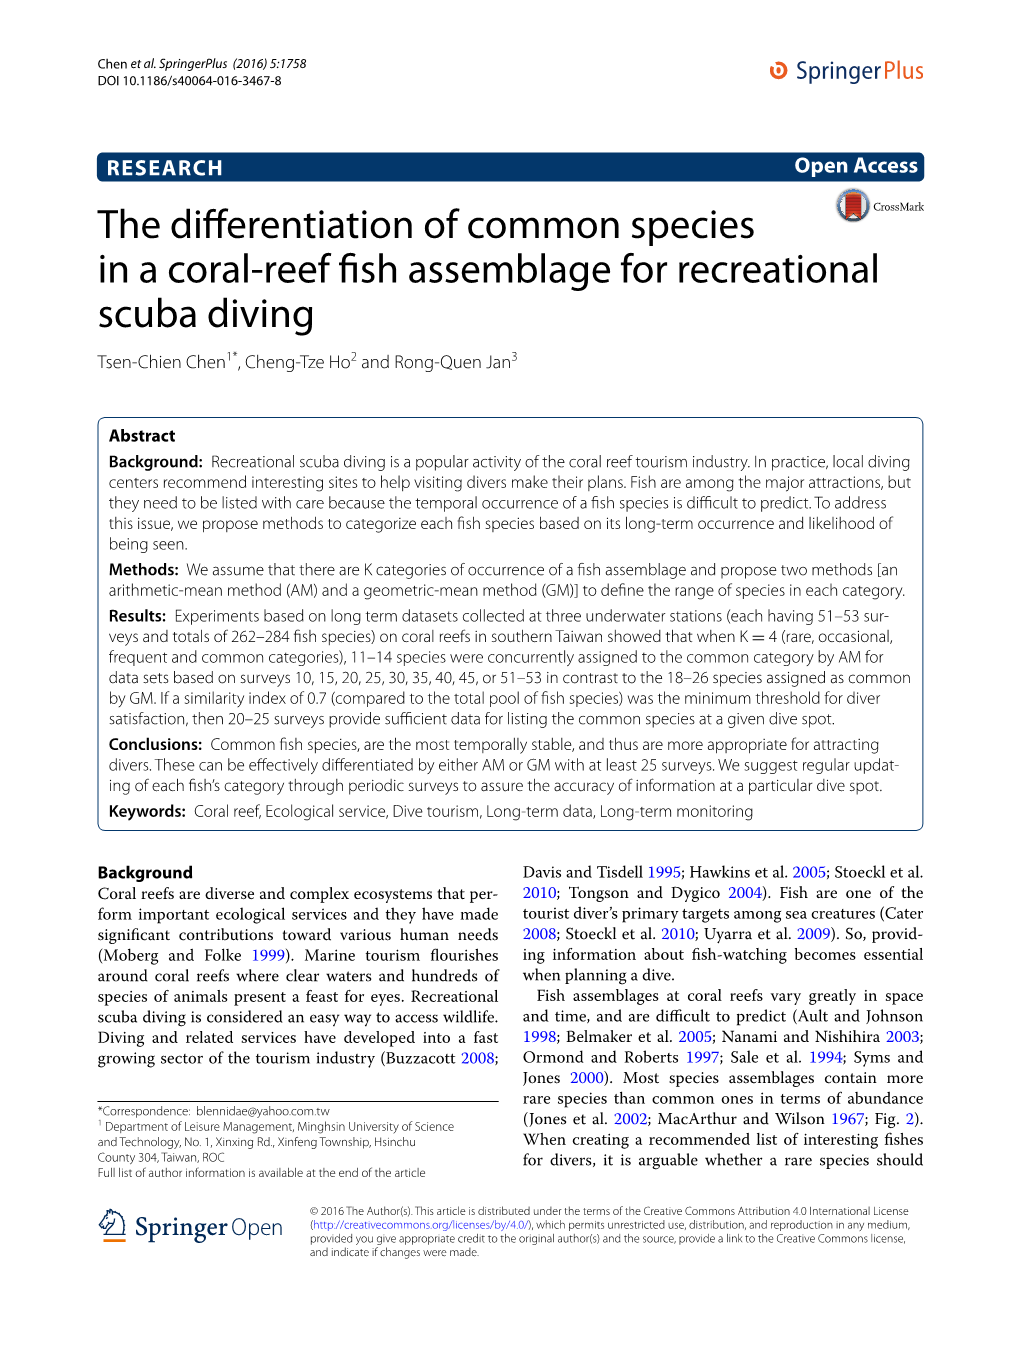 The Differentiation of Common Species in a Coral-Reef Fish Assemblage for Recreational Scuba Diving